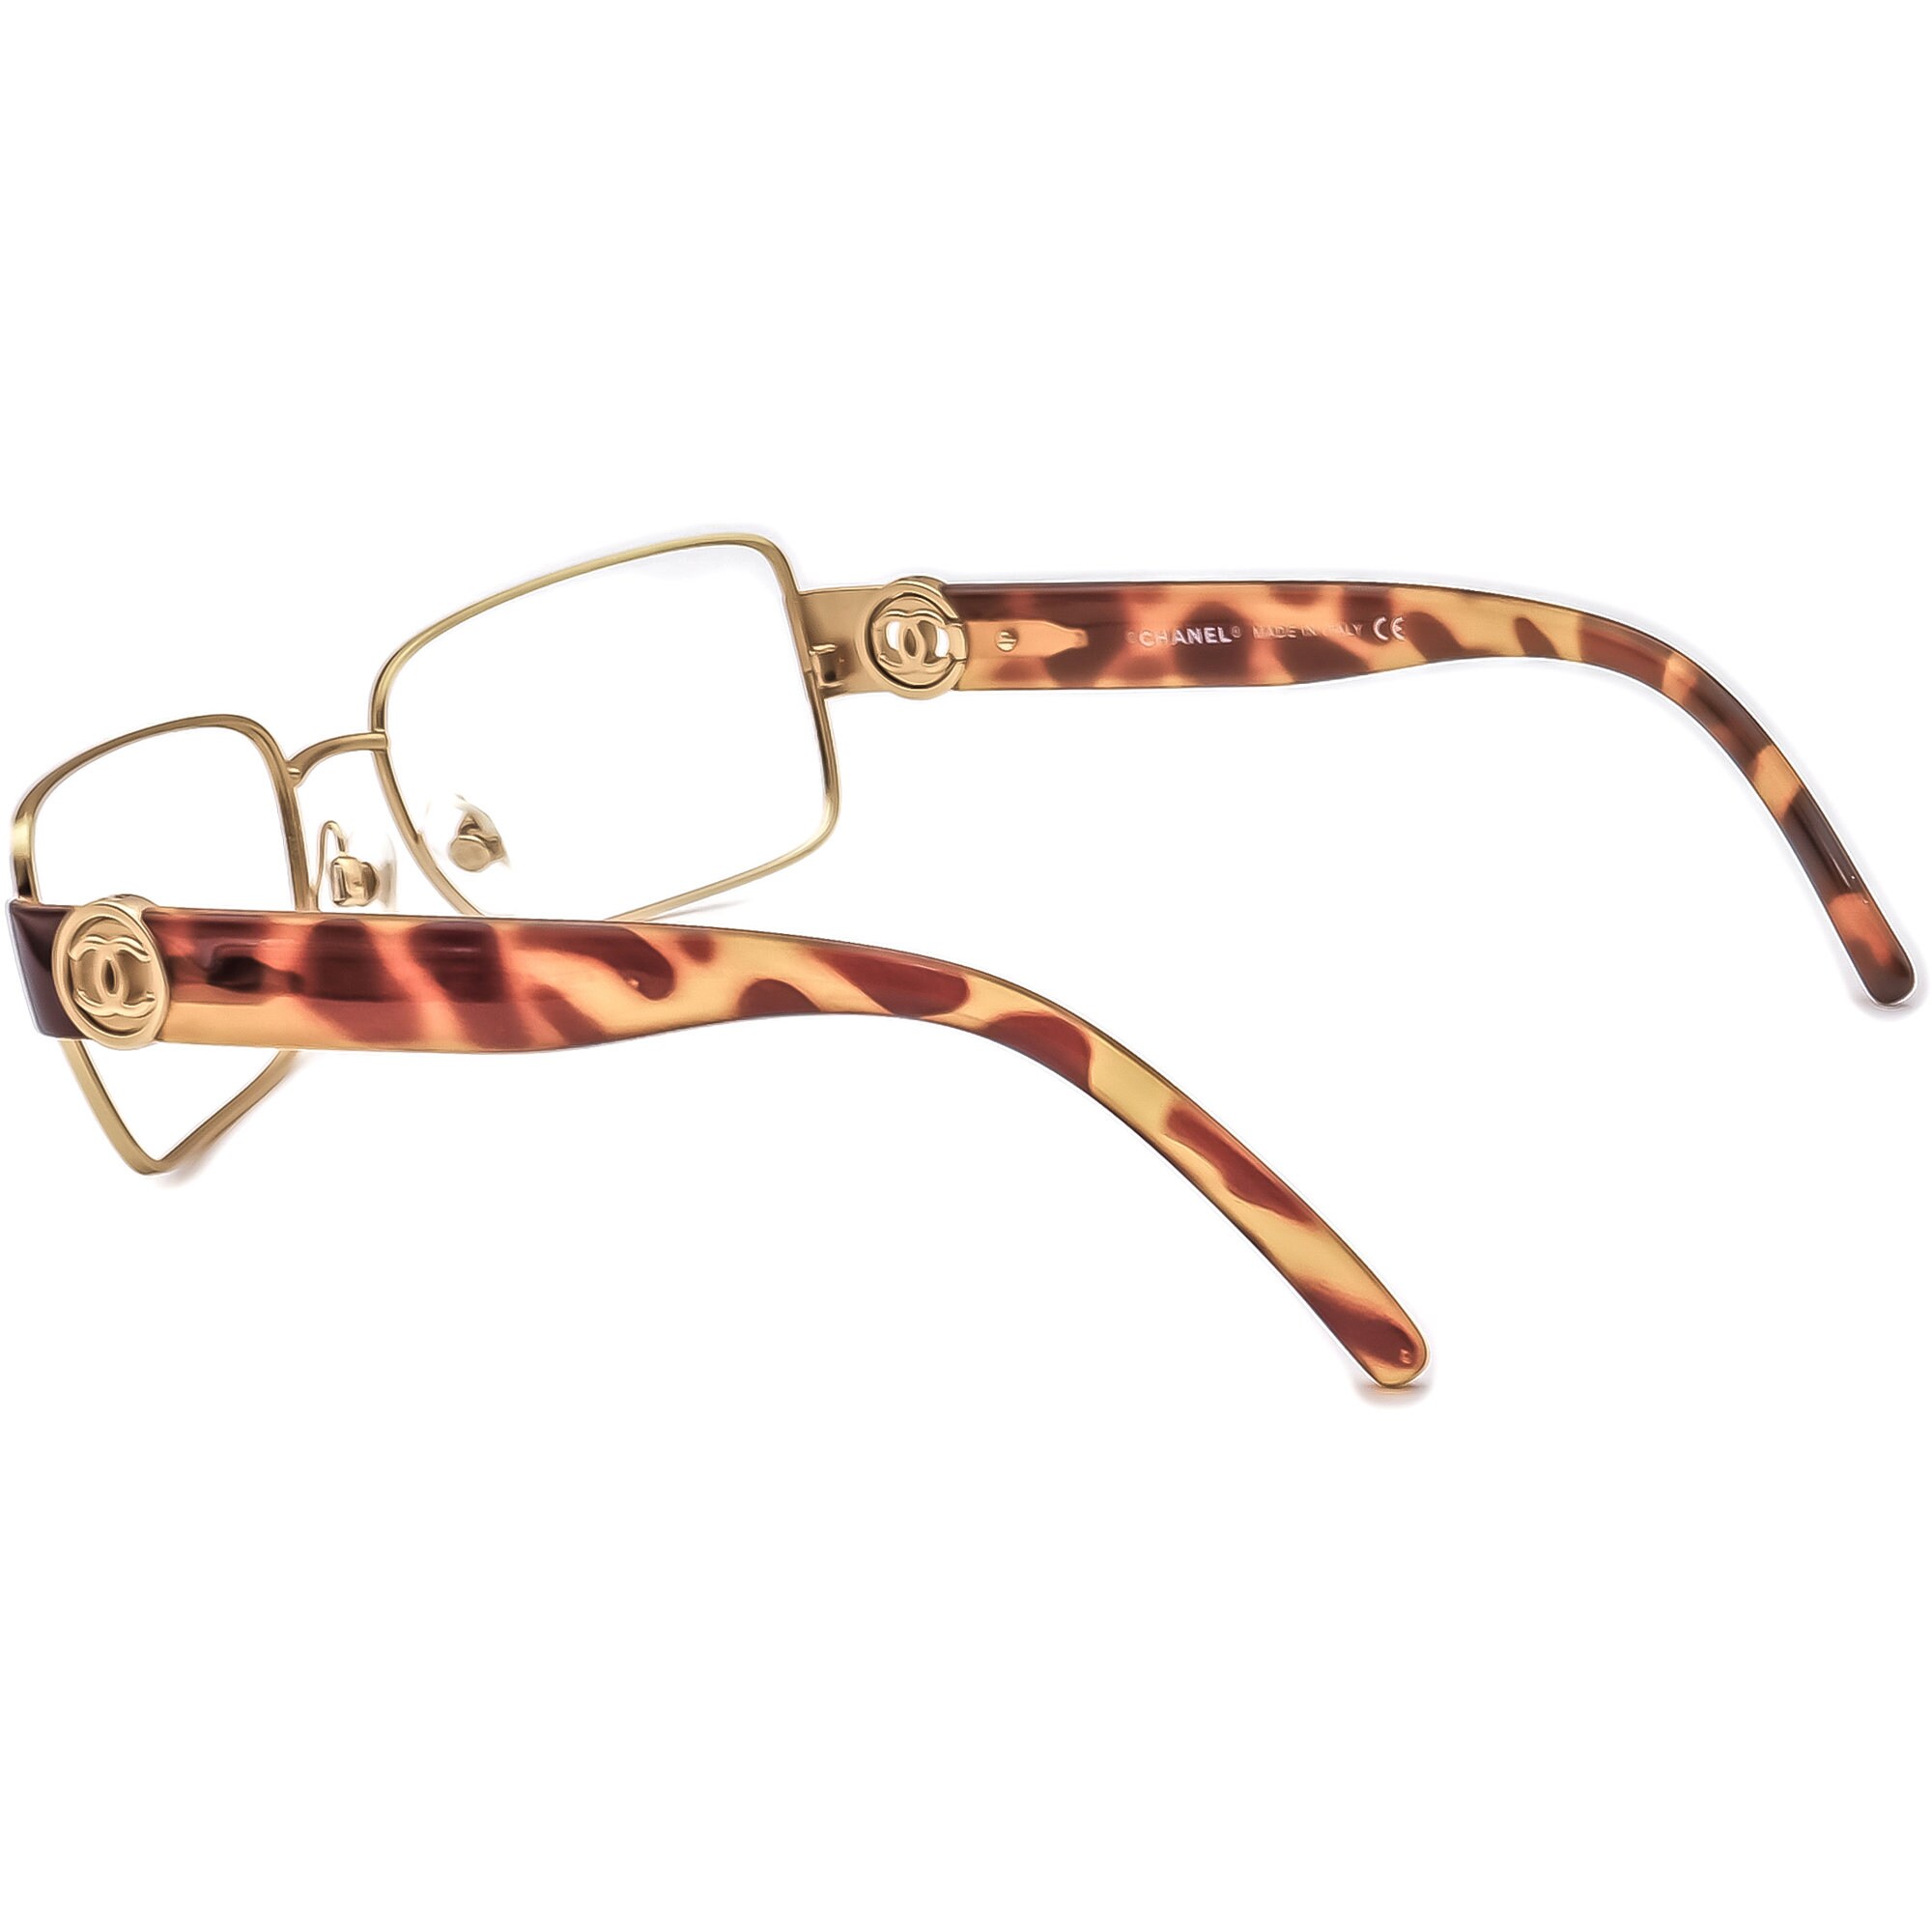 Chanel Sunglasses Frame Only 4152 C.354/13 Gold/leopard 